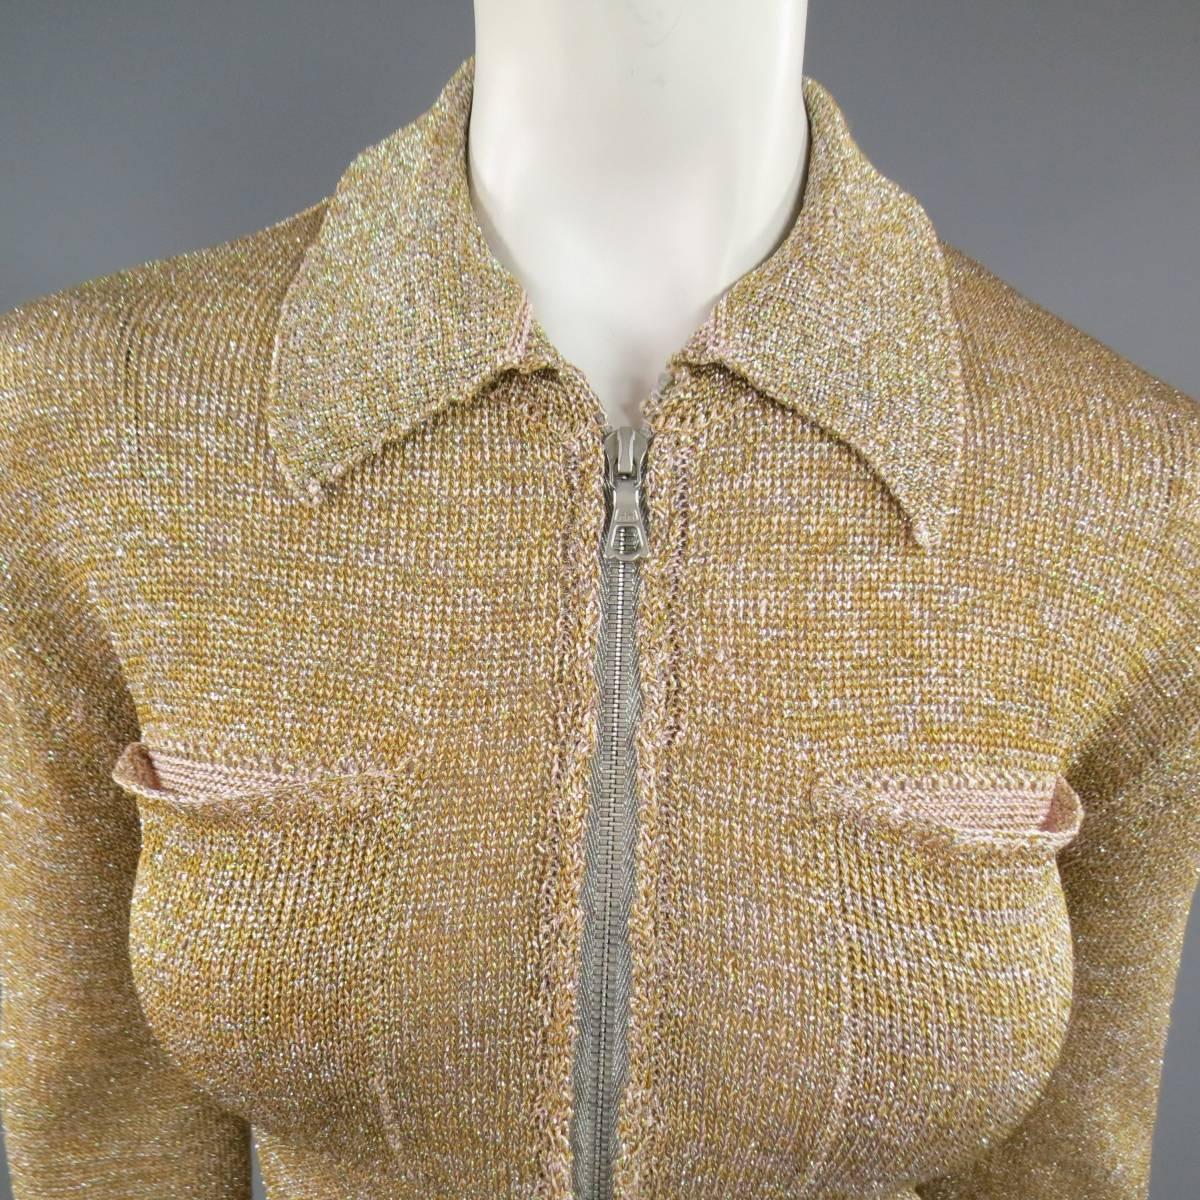 This fabulous DRIES VAN NOTEN cardigan comes in a sparkling gold and pink lurex glitter knit and features a pointed collar, silver tone zipper closure, double breast pockets, and ribbed cuffs. Made in Belgium.
 
Good Pre-Owned Condition.
Marked: